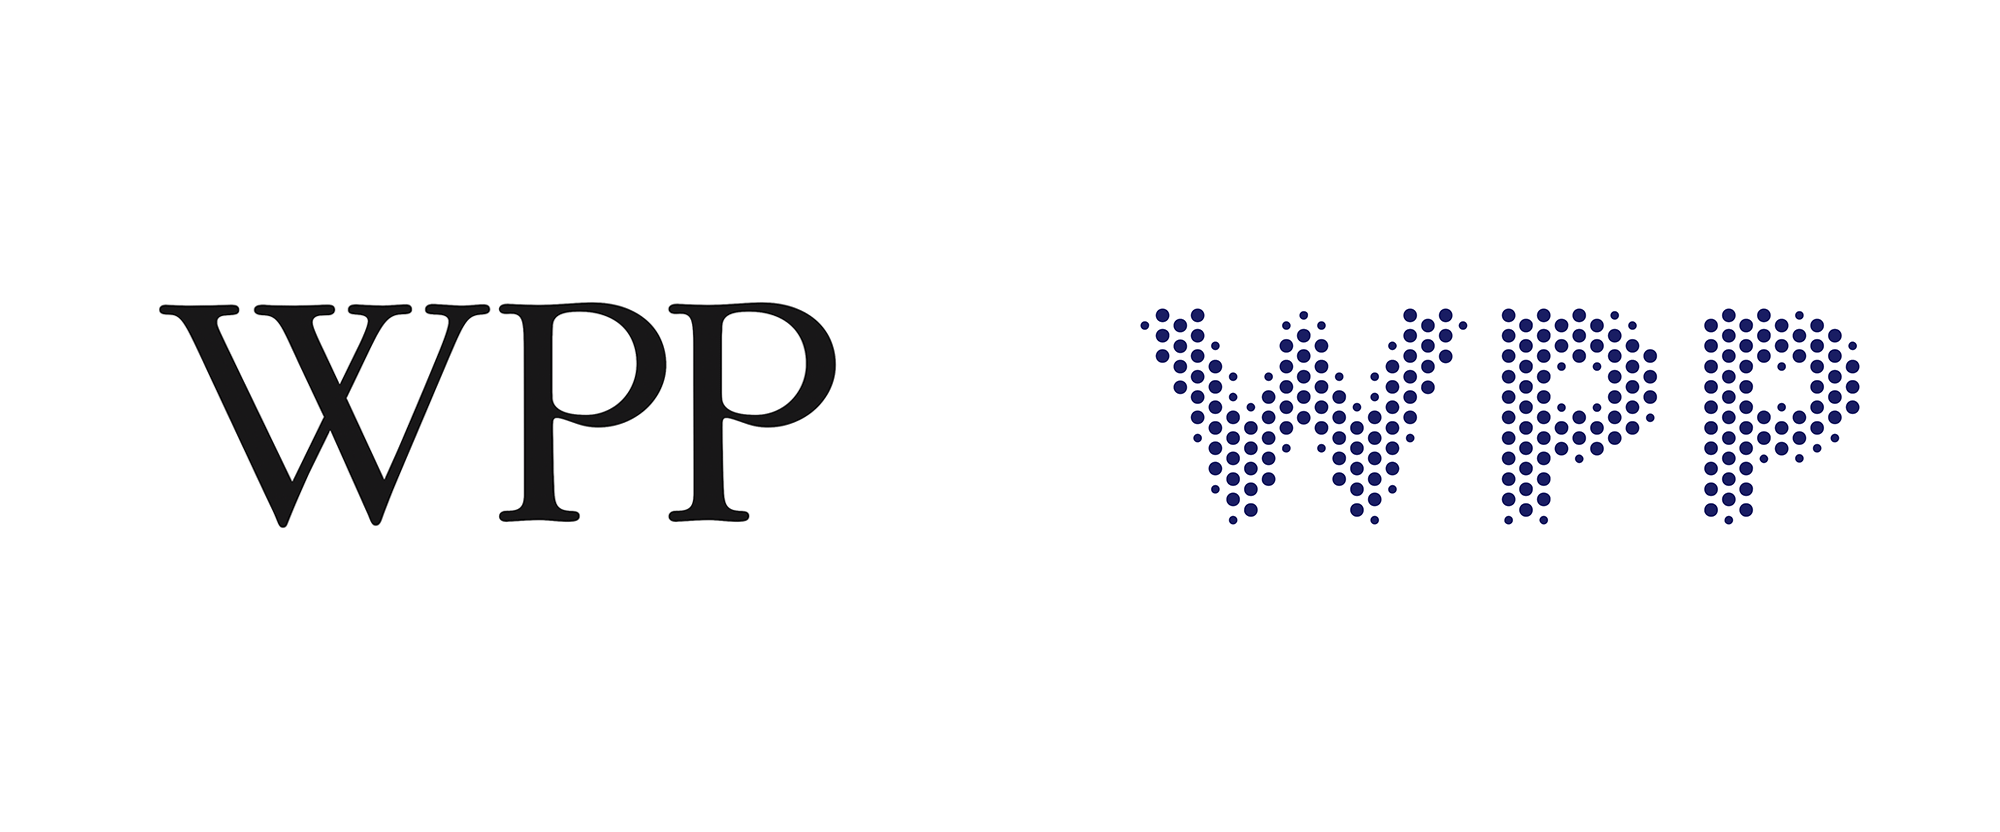 Small Dots Logo - Brand New: New Logo and Identity for WPP by Landor and Superunion